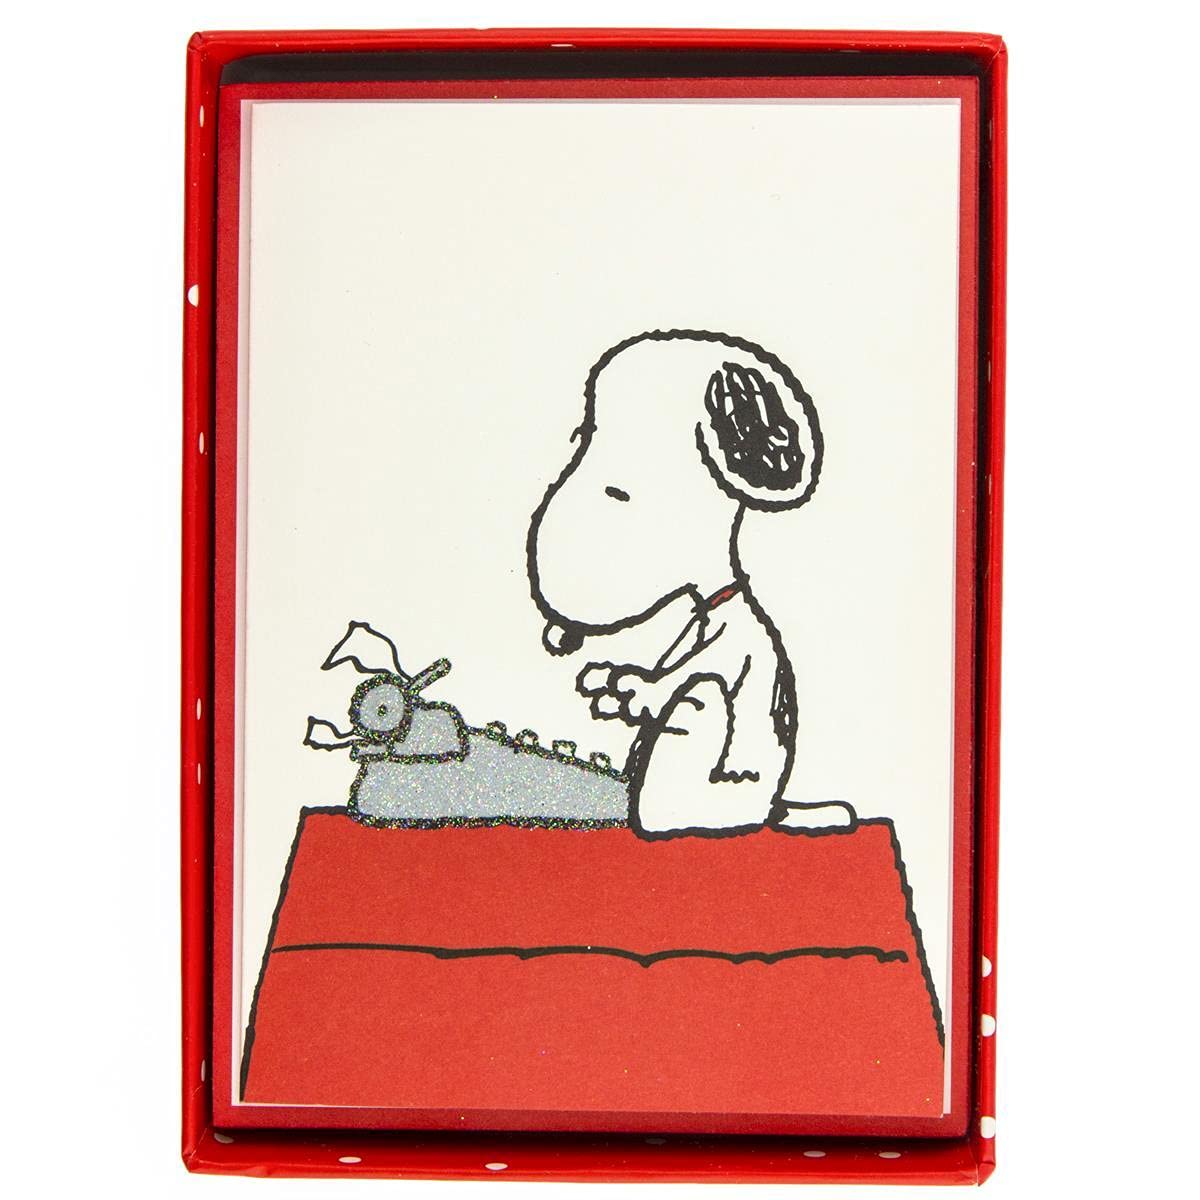 Graphique Peanuts Typewriter Boxed Notecards, 16 Snoopy at Typewriter Cards Embellished with Glitter, with Matching Envelopes and Storage Box, 3.25